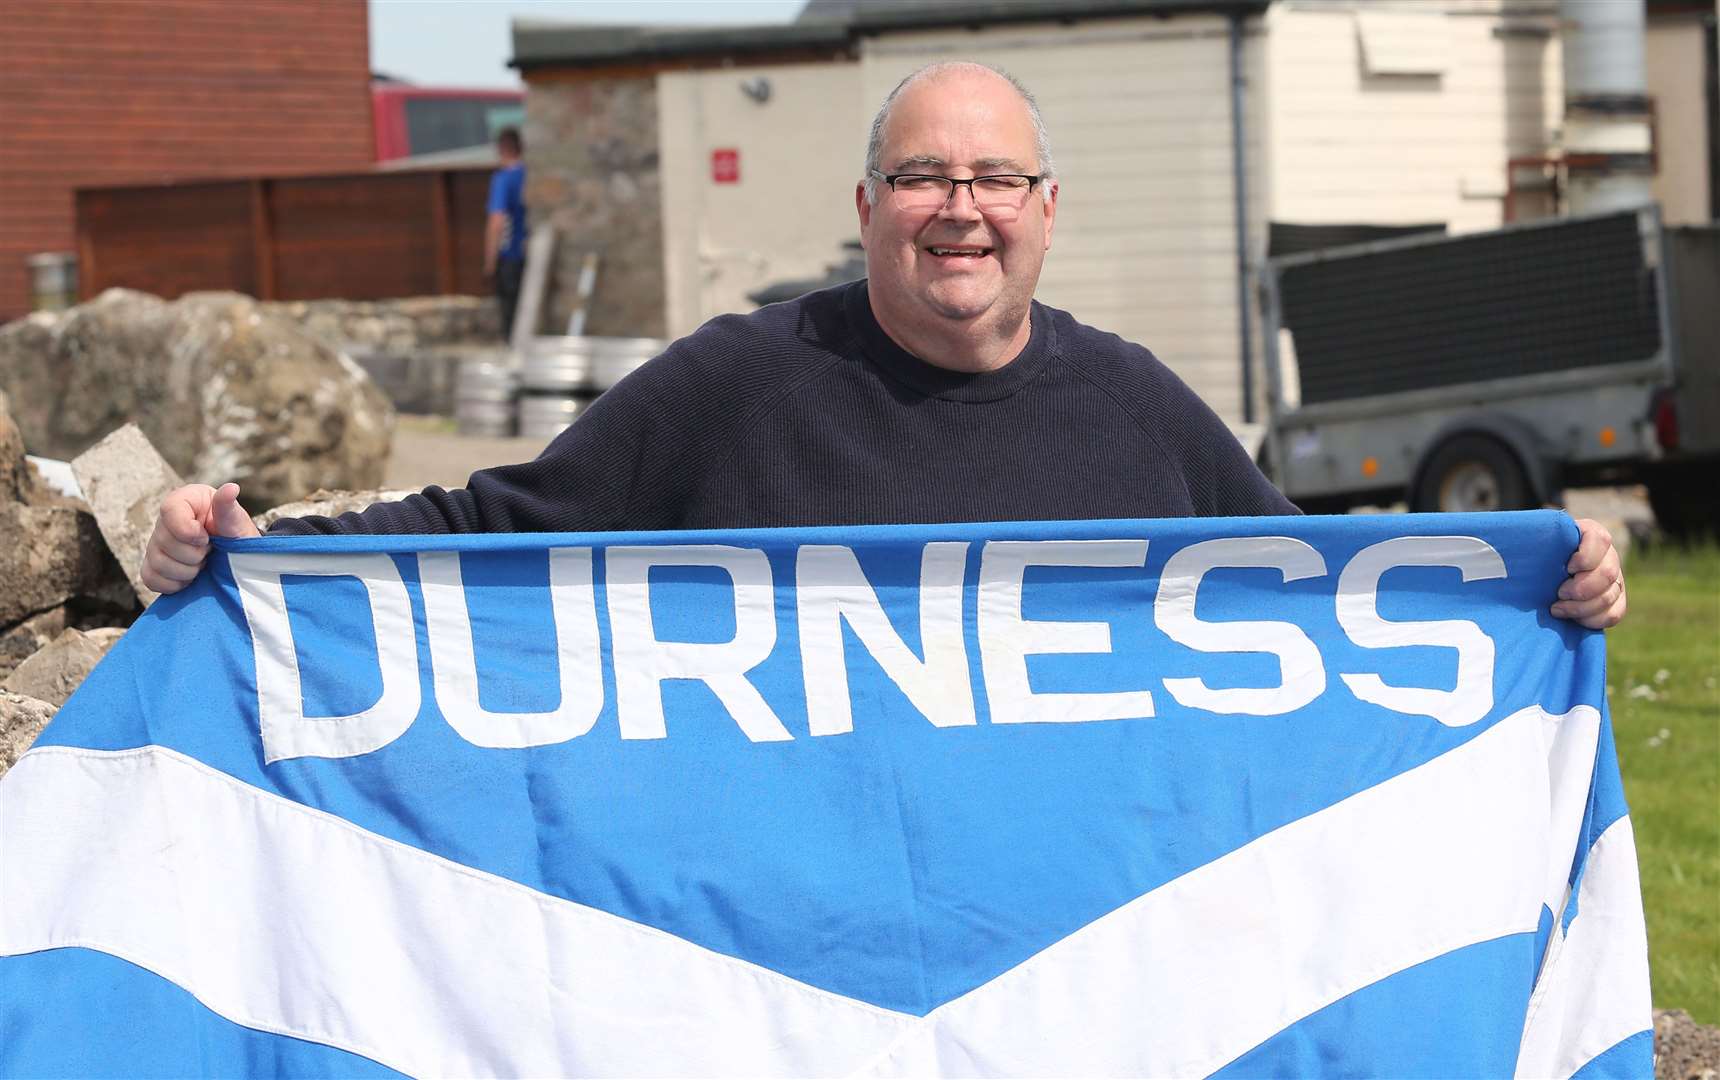 Scotland fan Hugh Morrison who will be travelling to Wembley from Durness for the England vs Scotland game. He will be the furthest travelled fan from mainland UK. Picture: Peter Jolly